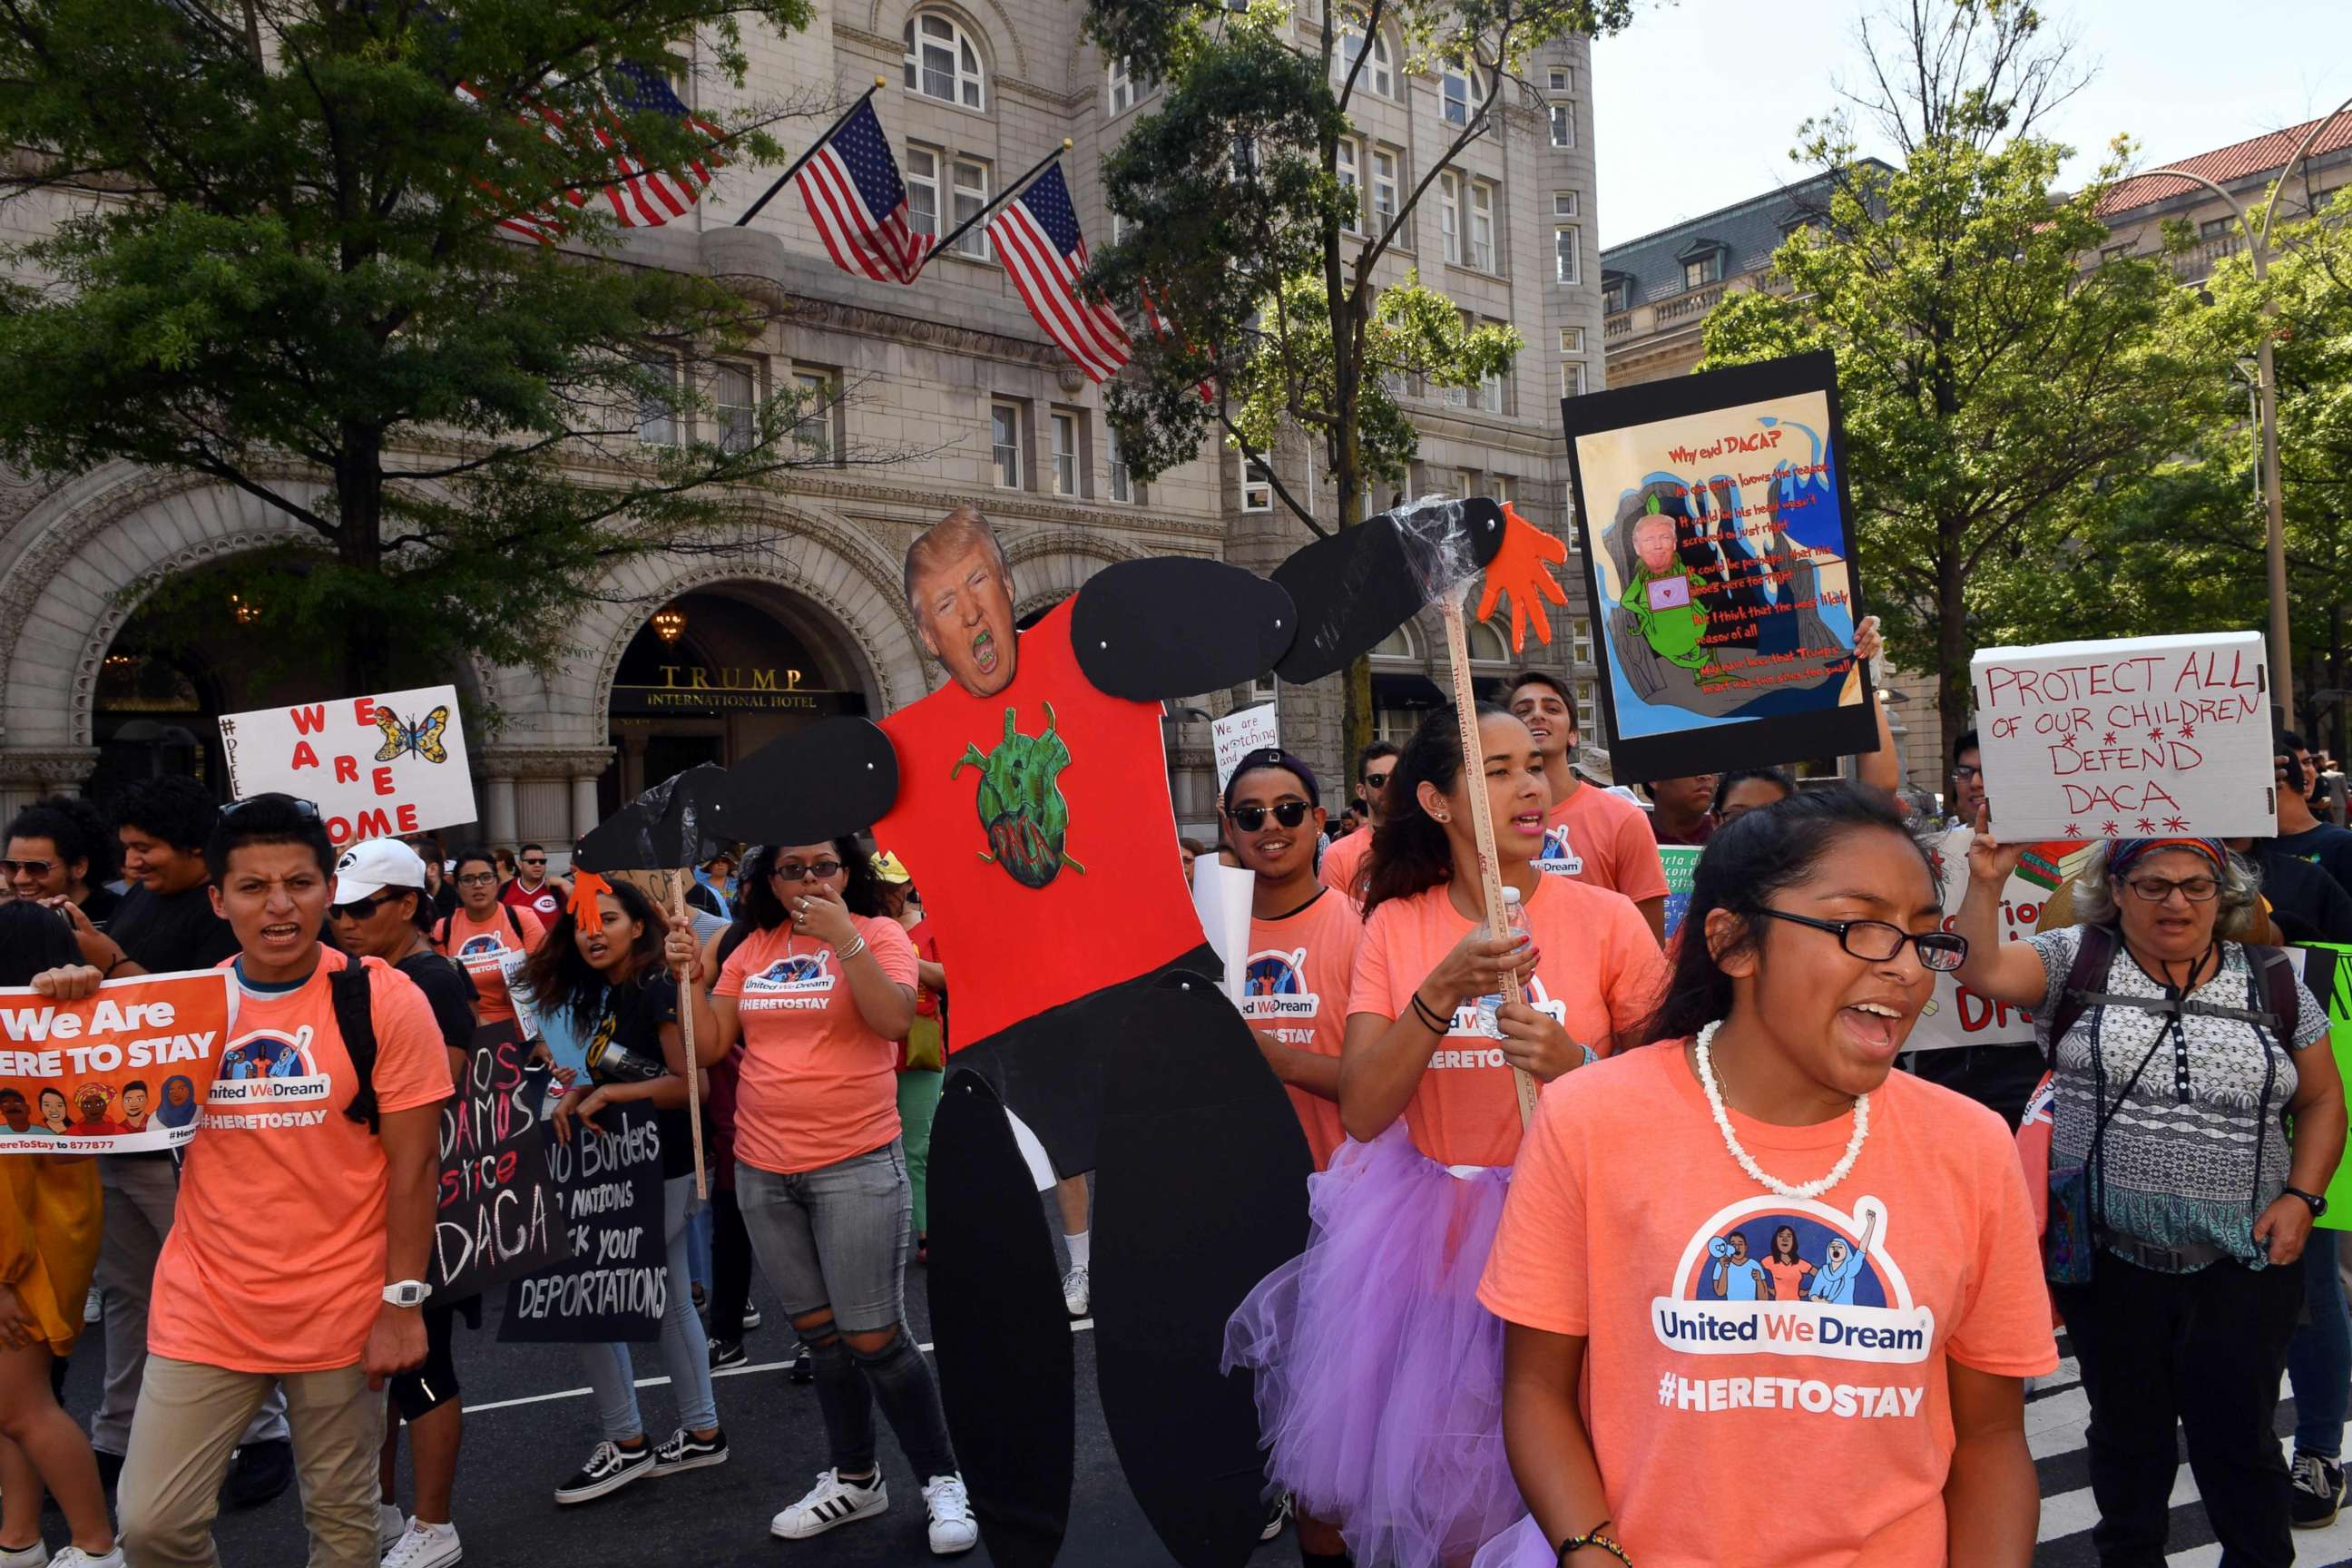 PHOTO: Immigrants and supporters demonstrate during a rally in support of the Deferred Action for Childhood Arrivals (DACA) program in front of the Trump International Hotel, on Sept. 5, 2017, in Washington.